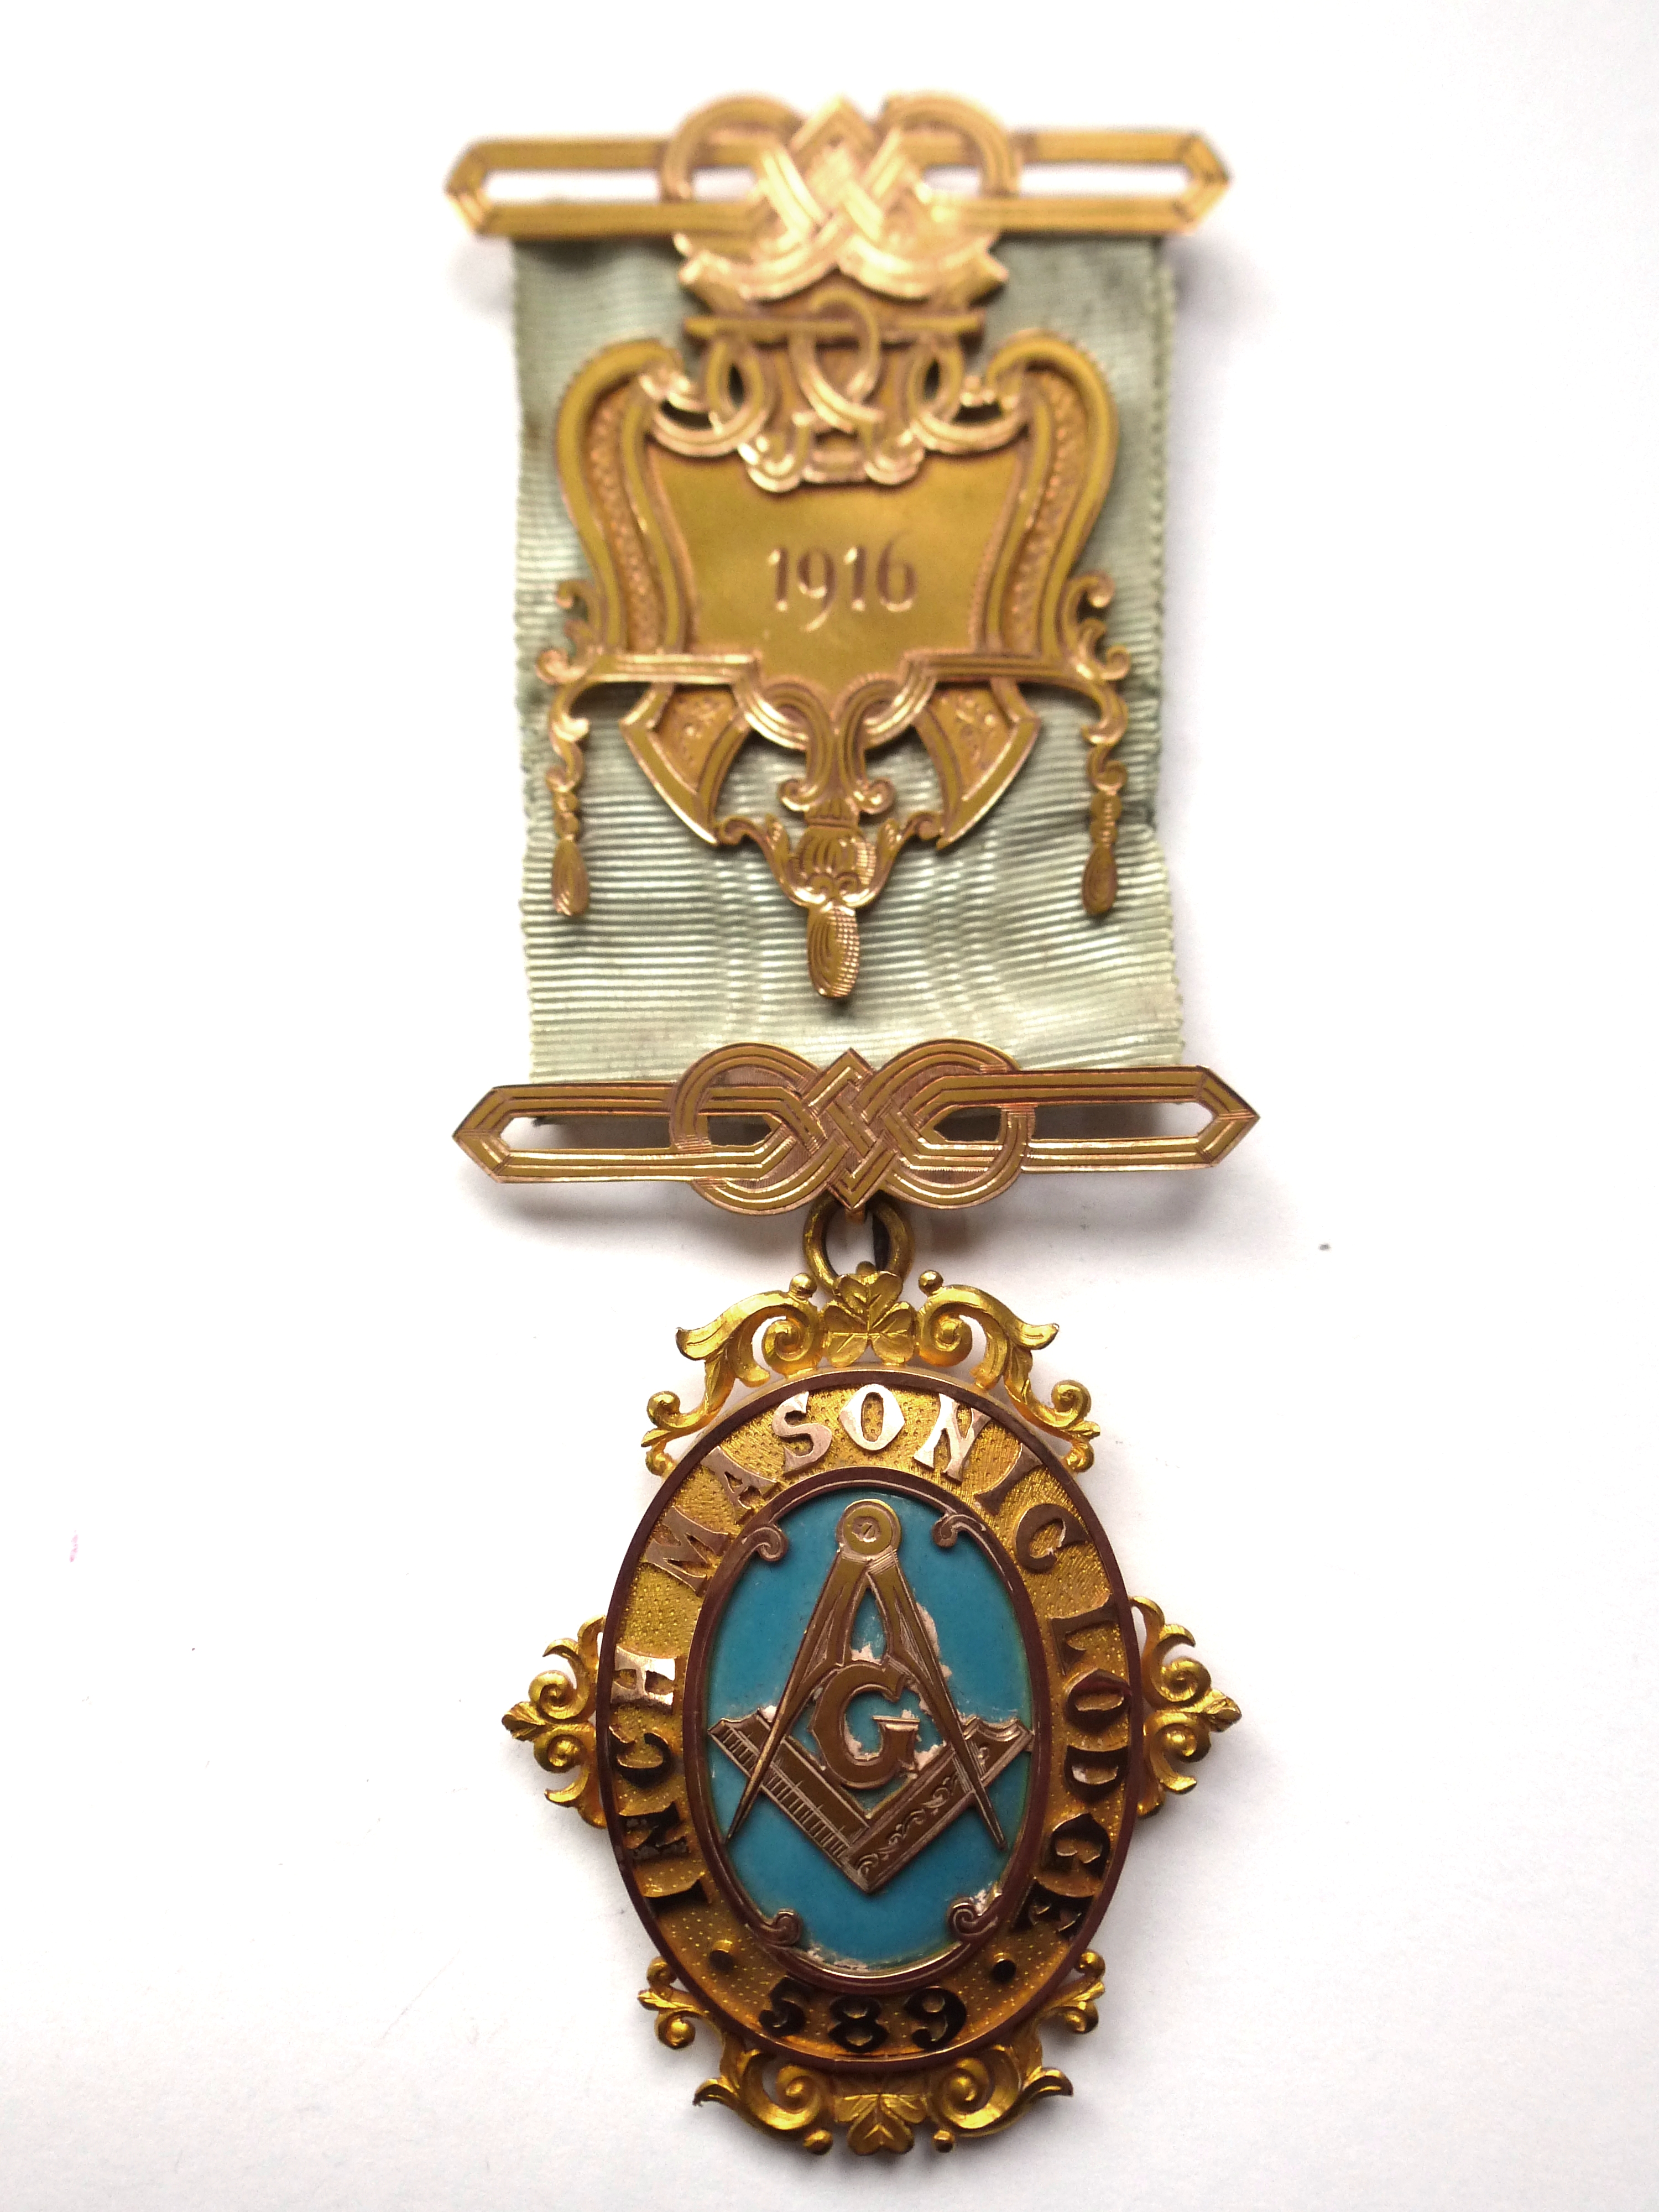 1916 9K GOLD INCH MASONIC LODGE 589 MEDAL TOTAL W: 34.3G - Image 2 of 3